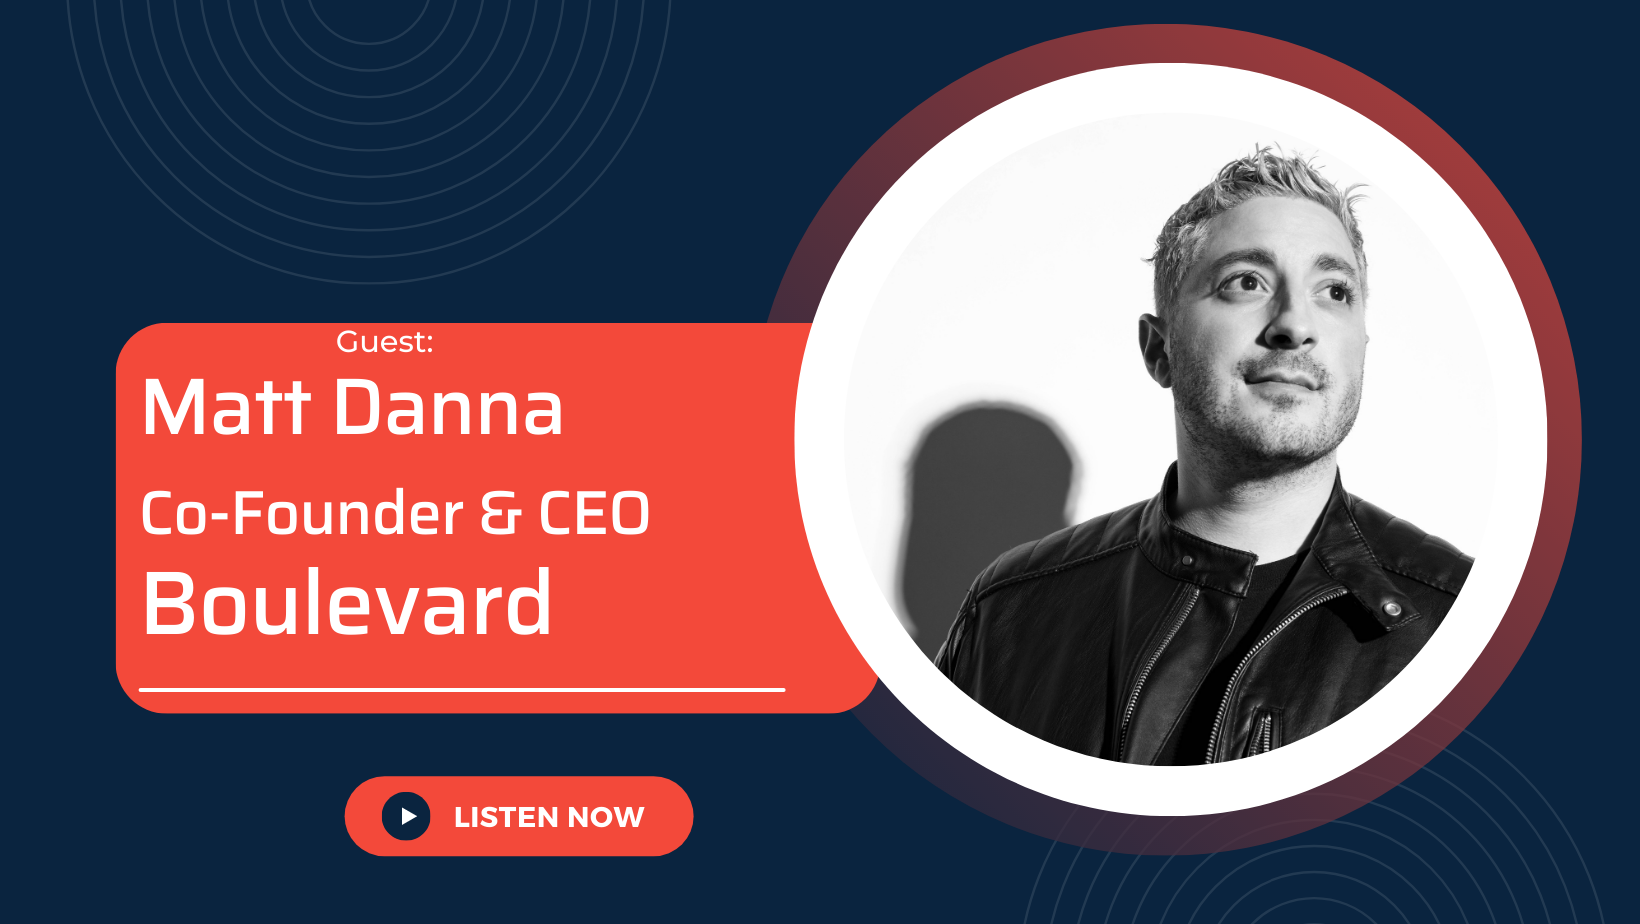 Secrets and Hacks For Business Owners from the Co-Founder & CEO of Boulevard, Matt Danna